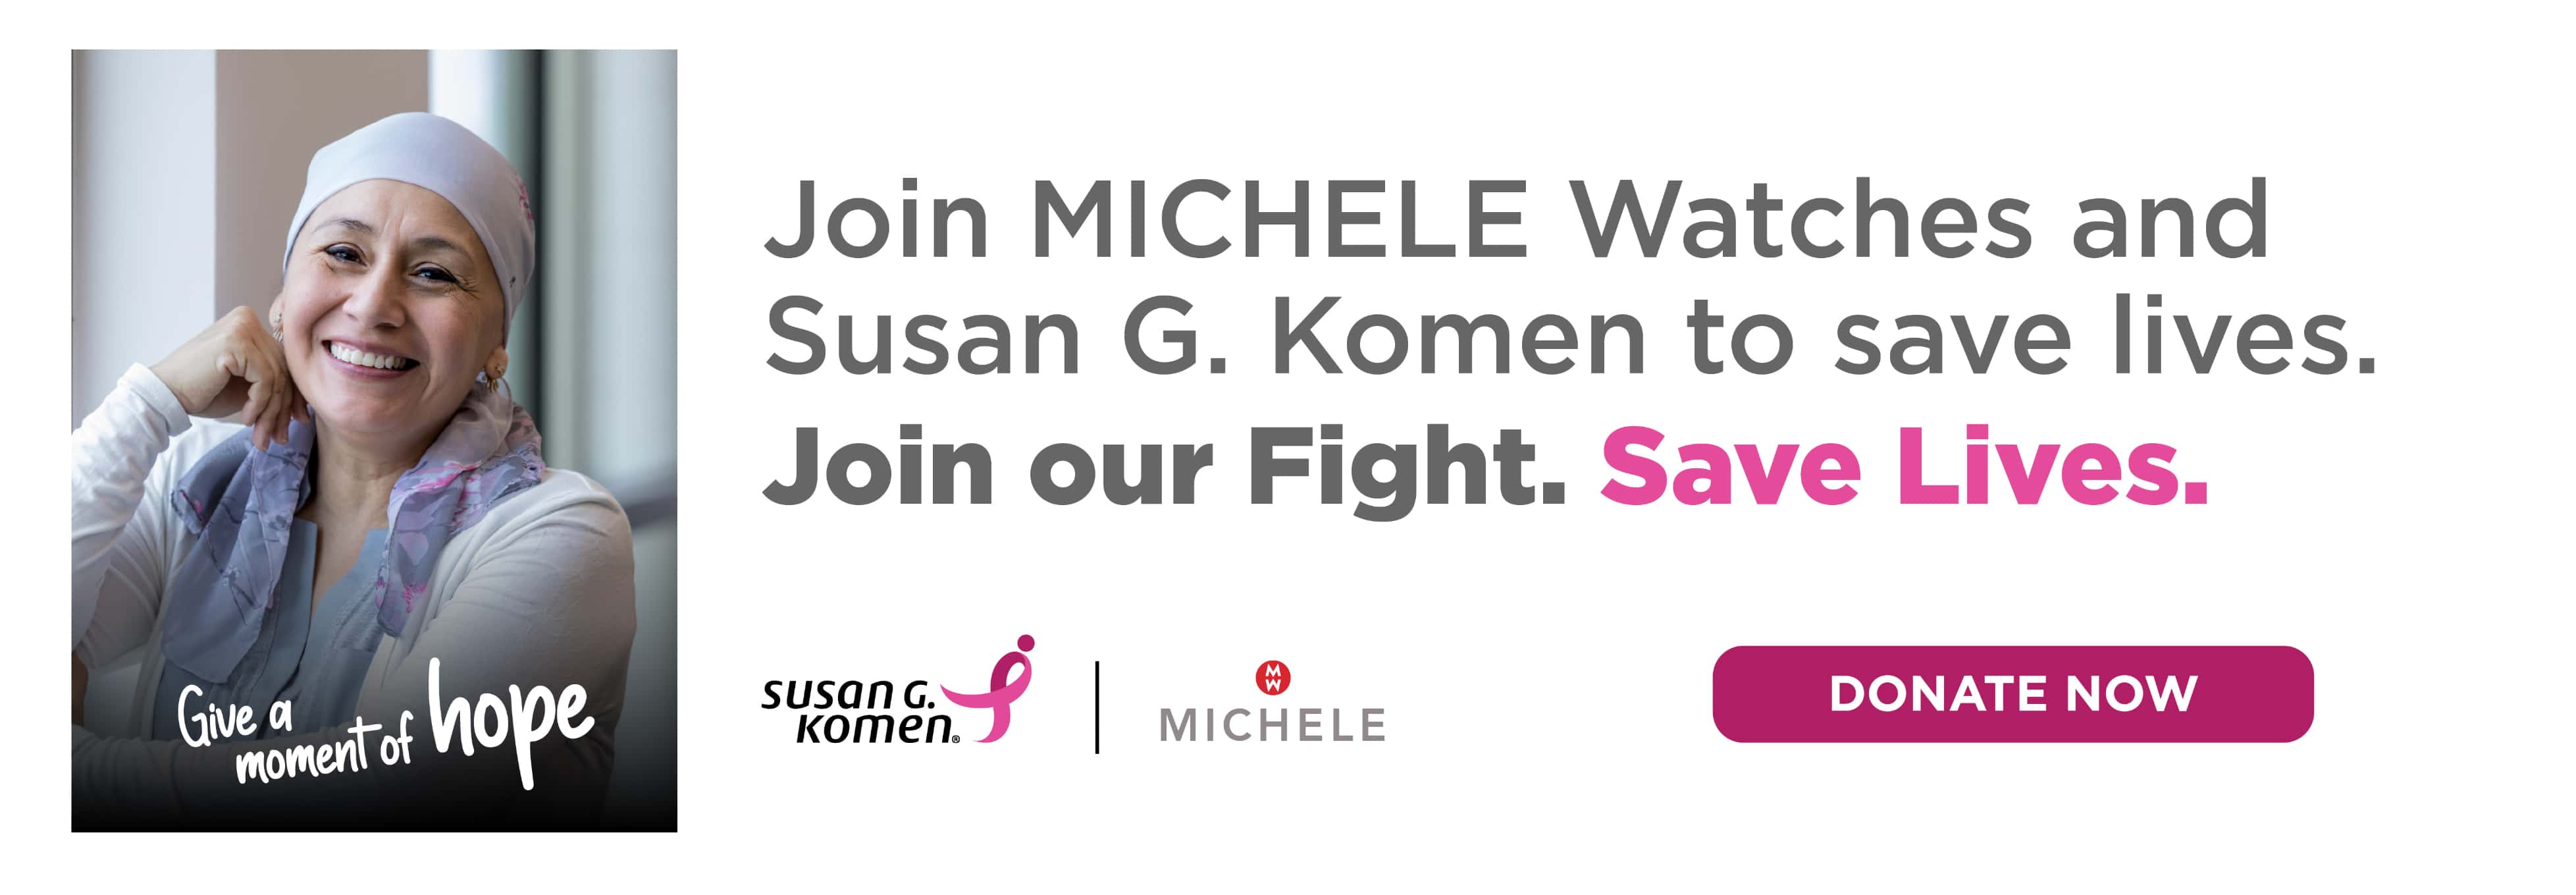 Smiling woman wearing a cap. Join MICHELE Watches and Susan G. Komen to save lives. Join our Fight. Save Lives. DONATE NOW